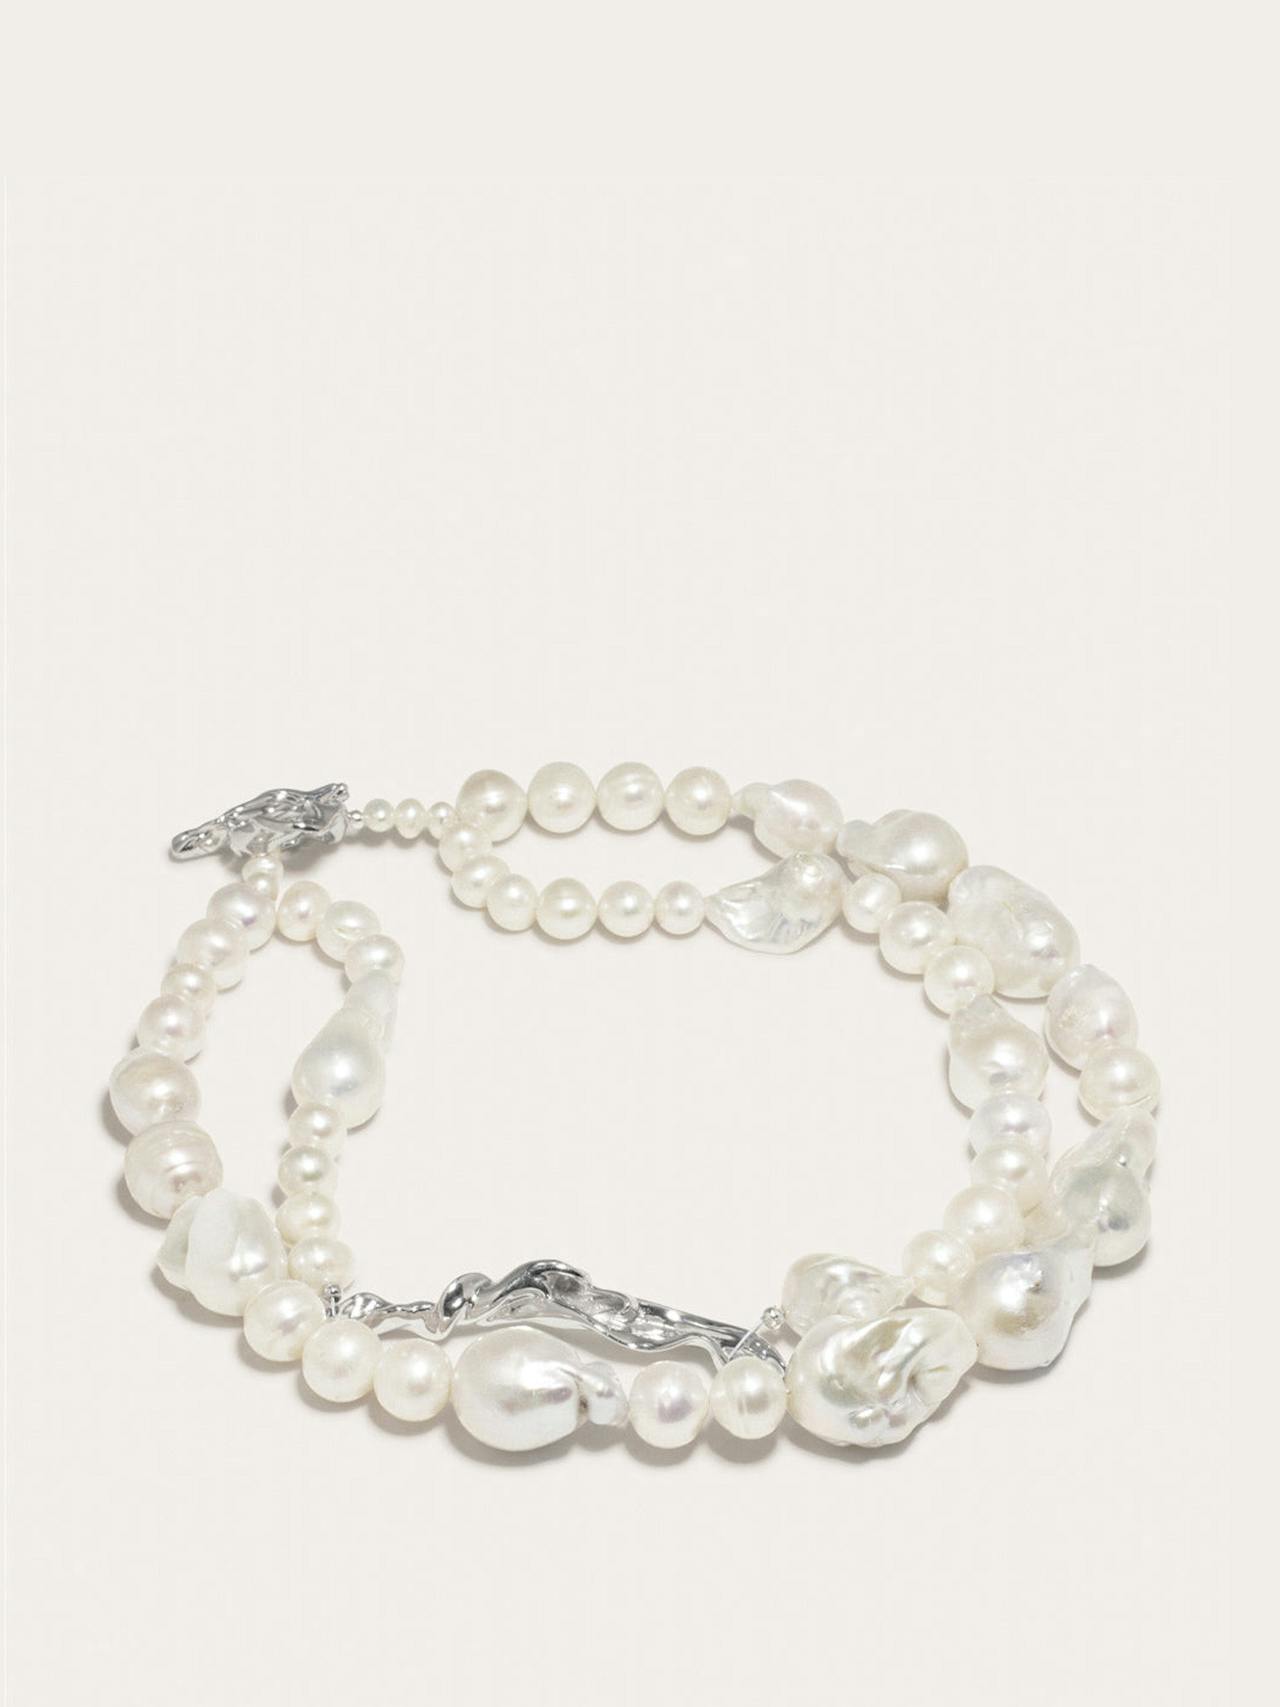 Pearl and rhodium foraging pearl necklace